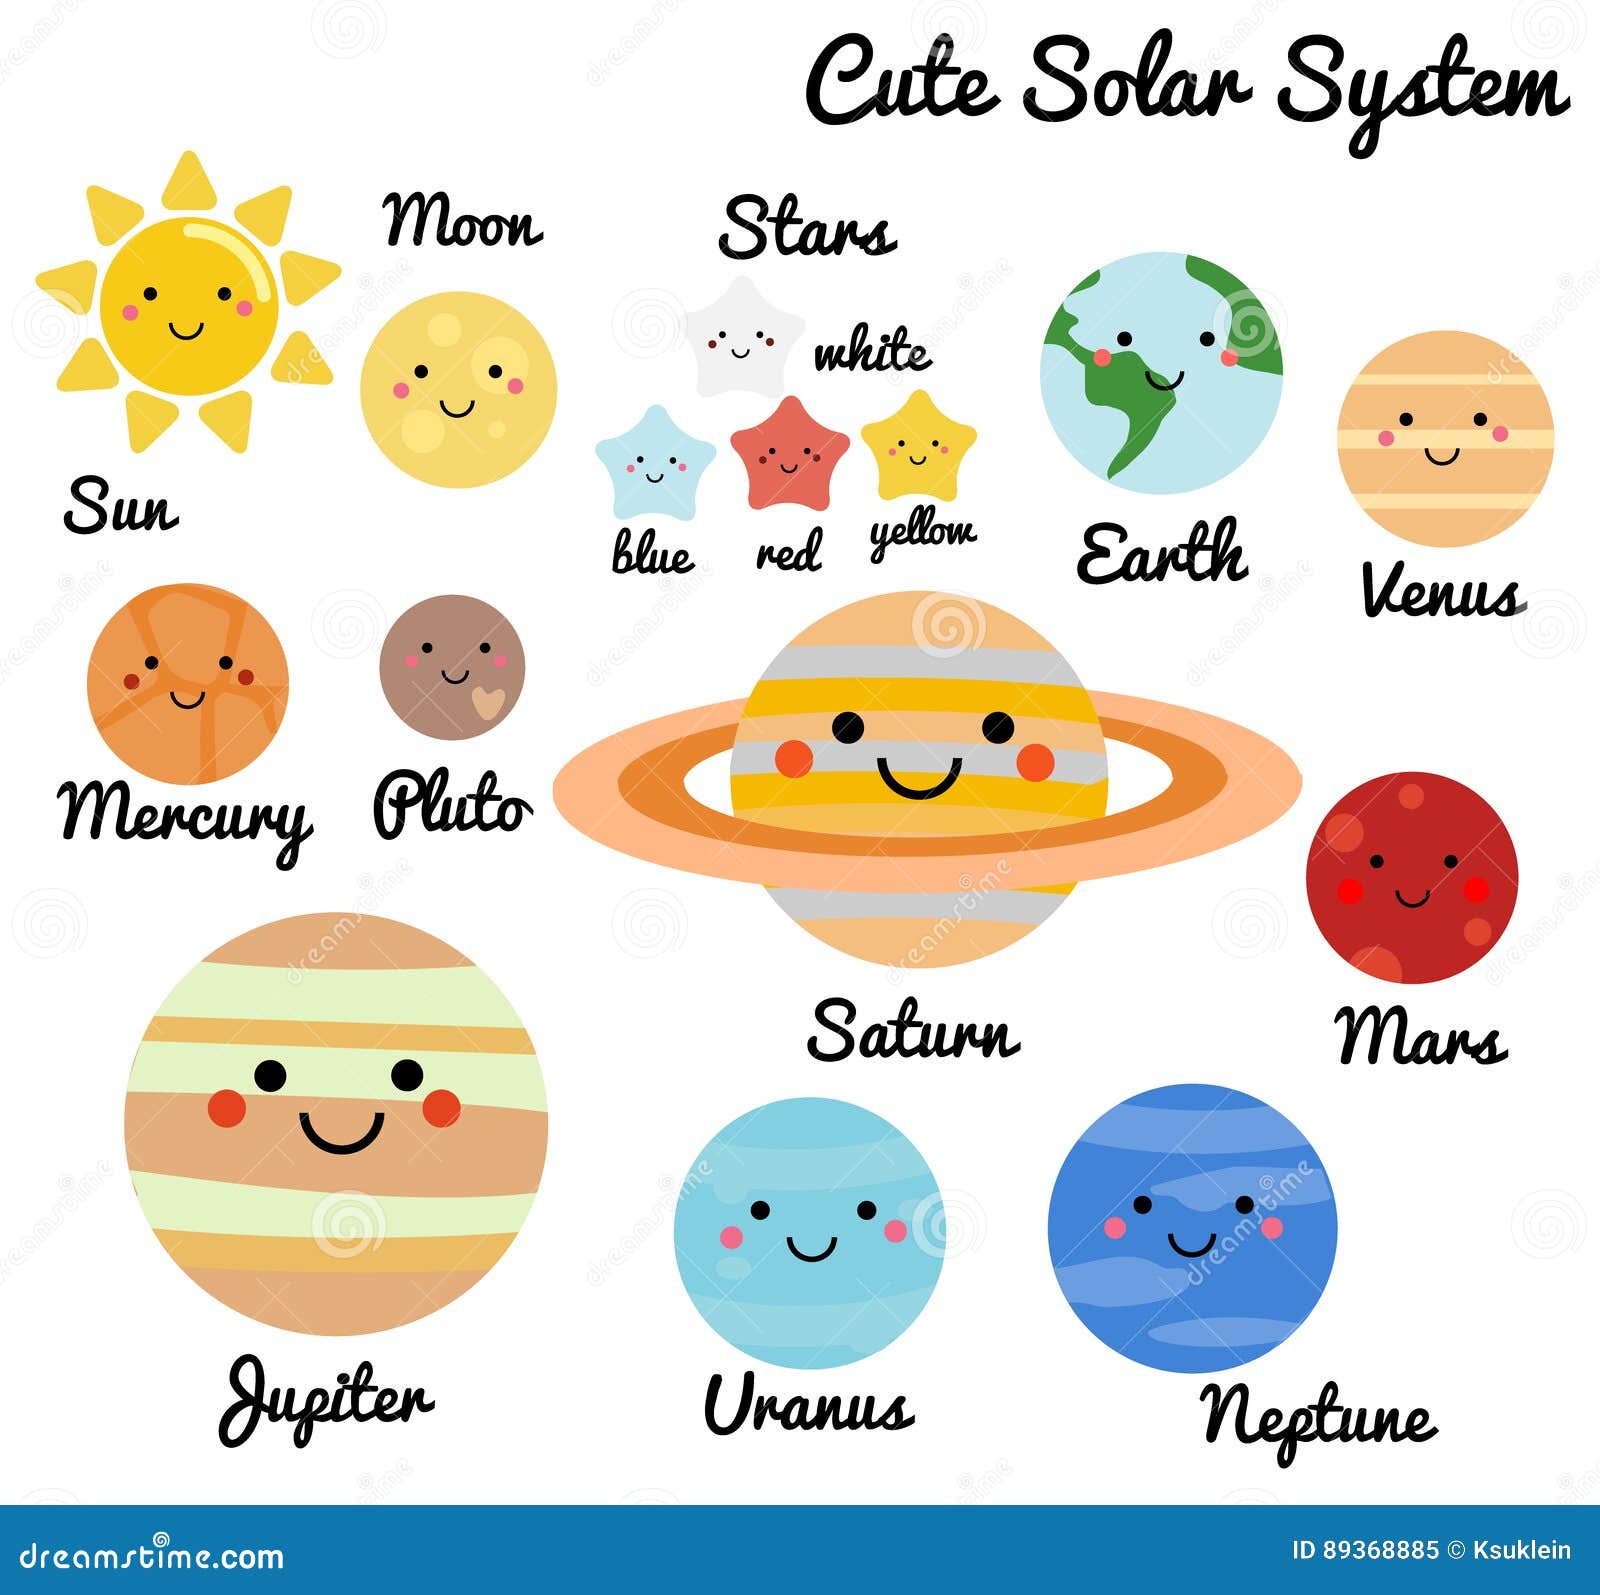 cute galaxy, space, solar system s. kawaii moon, sun and planets   for kids.   s for